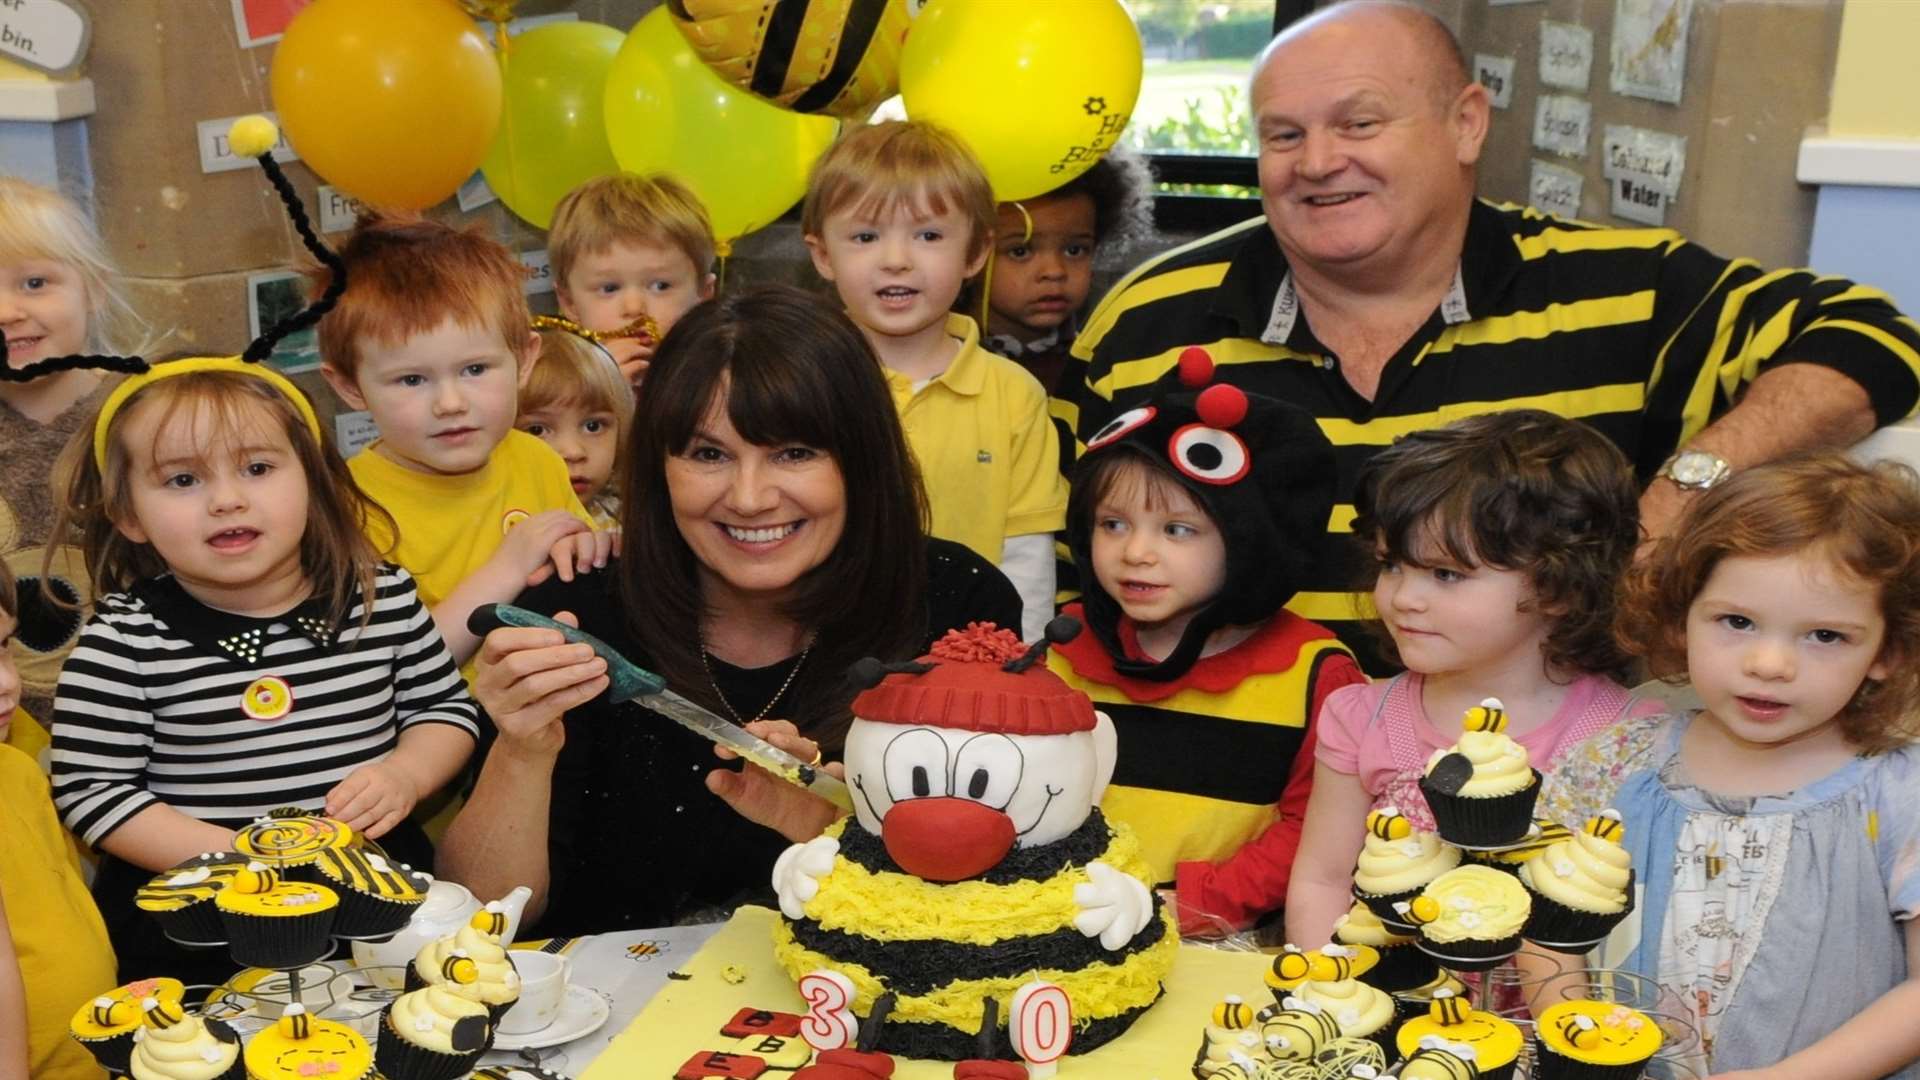 Busy Bees pupils enjoying birthday cakes with founders Marg Randles, managing director and John Woodward, chief executive officer. Picture: Katie Whirledge